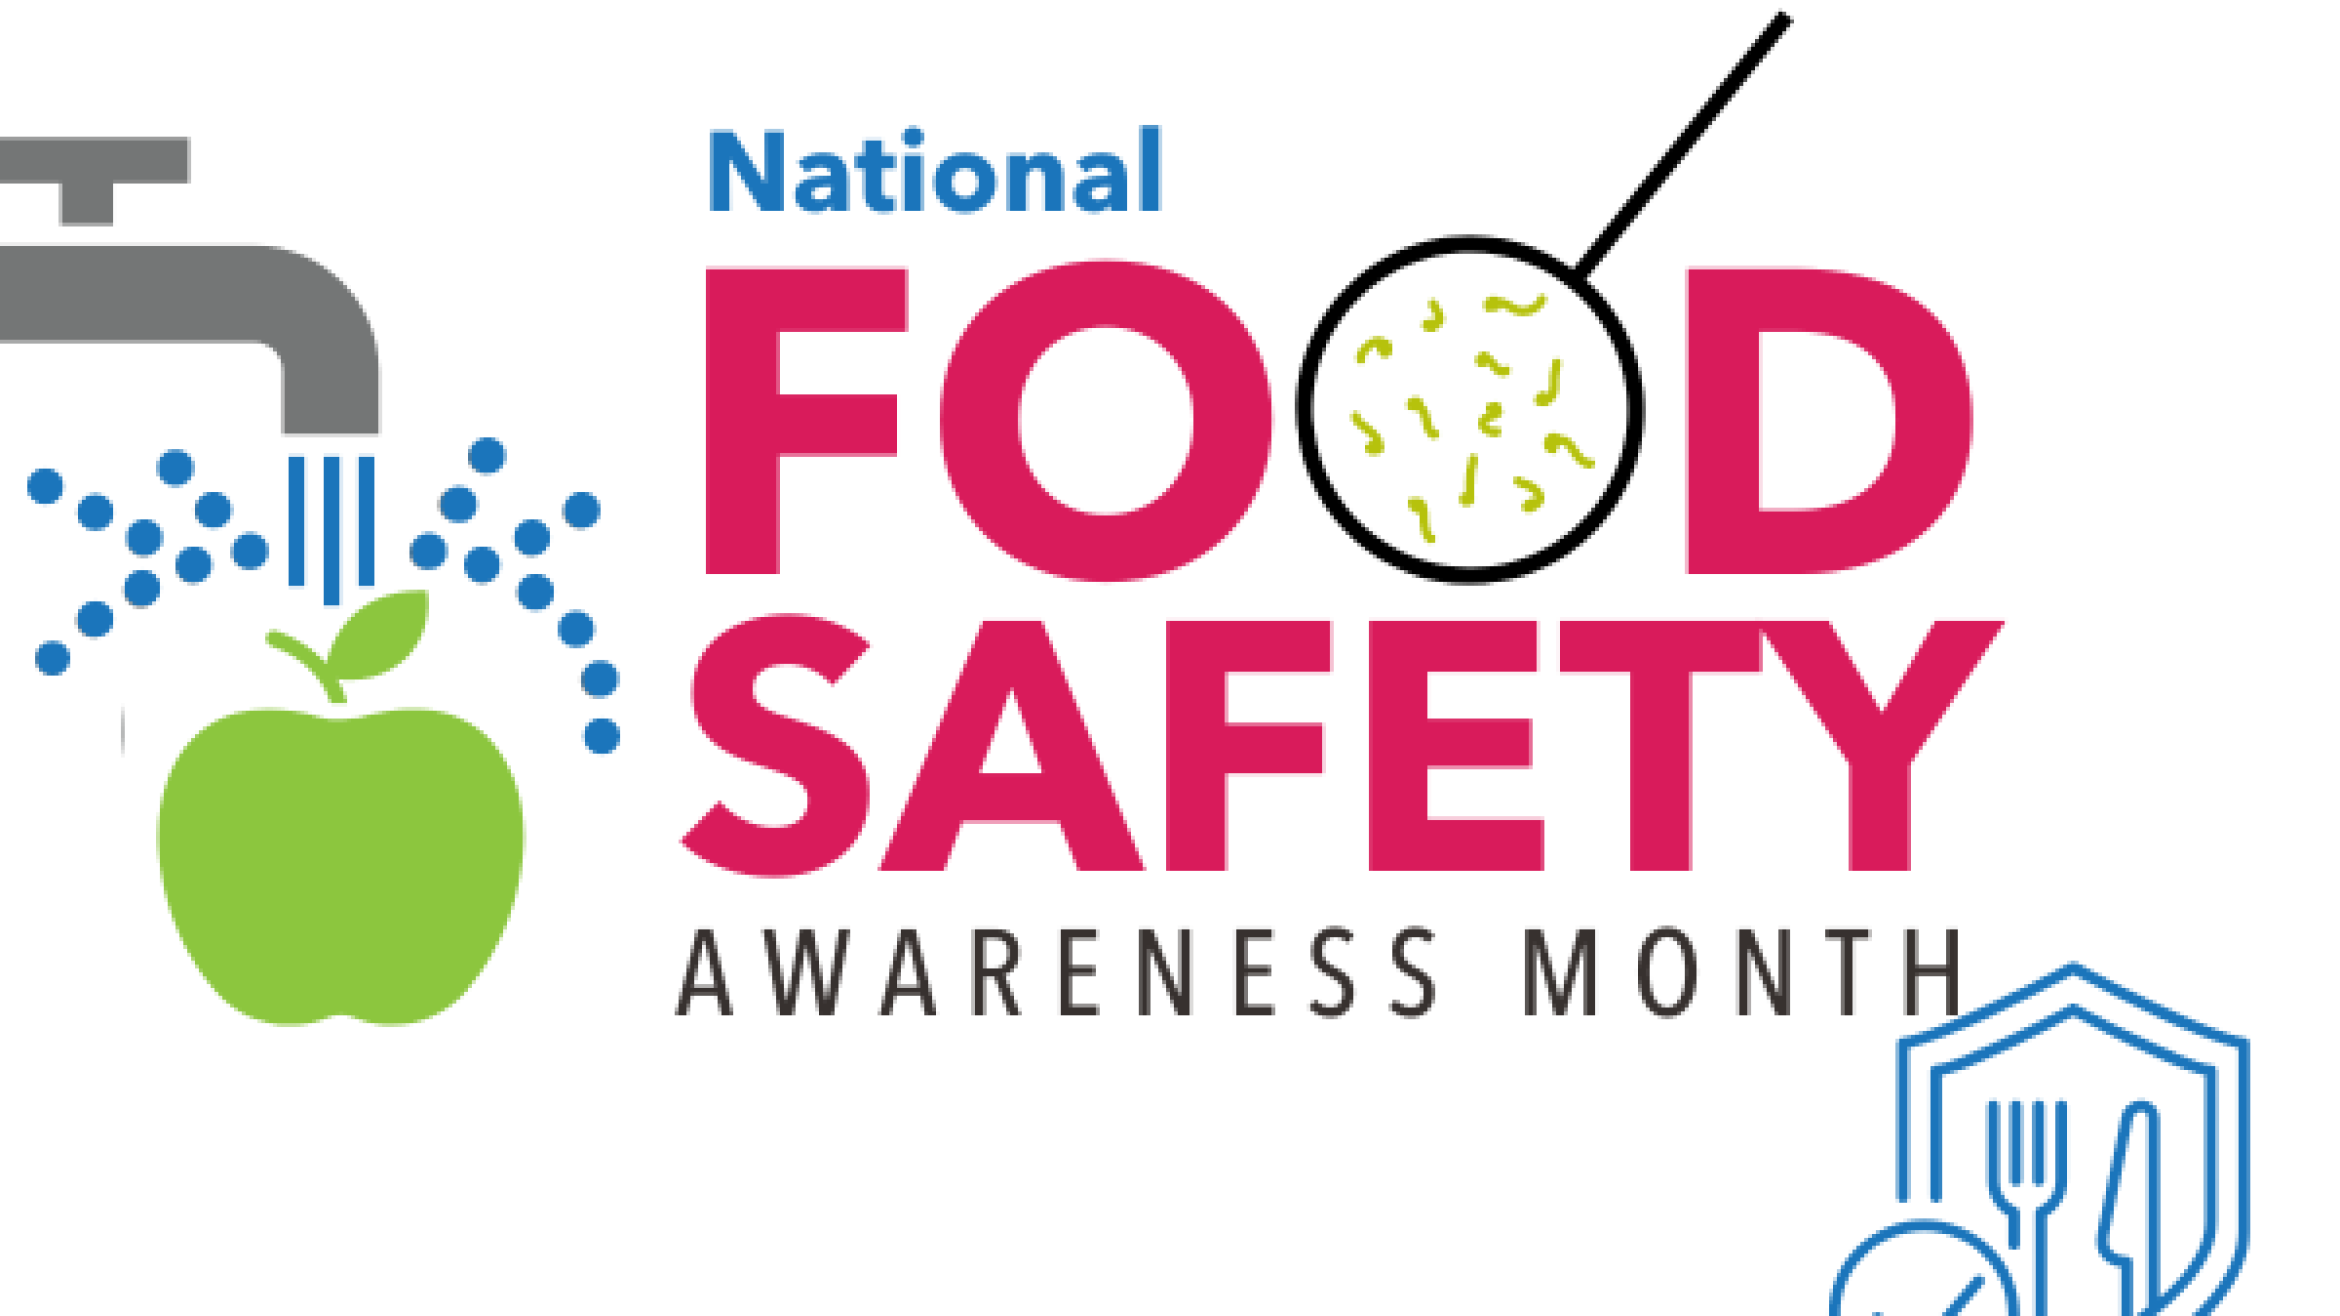 A water faucet icon with water over an apple. National Food Safety Awareness Month to the write. In the bottom right corne is a emblem with a fork and knife.